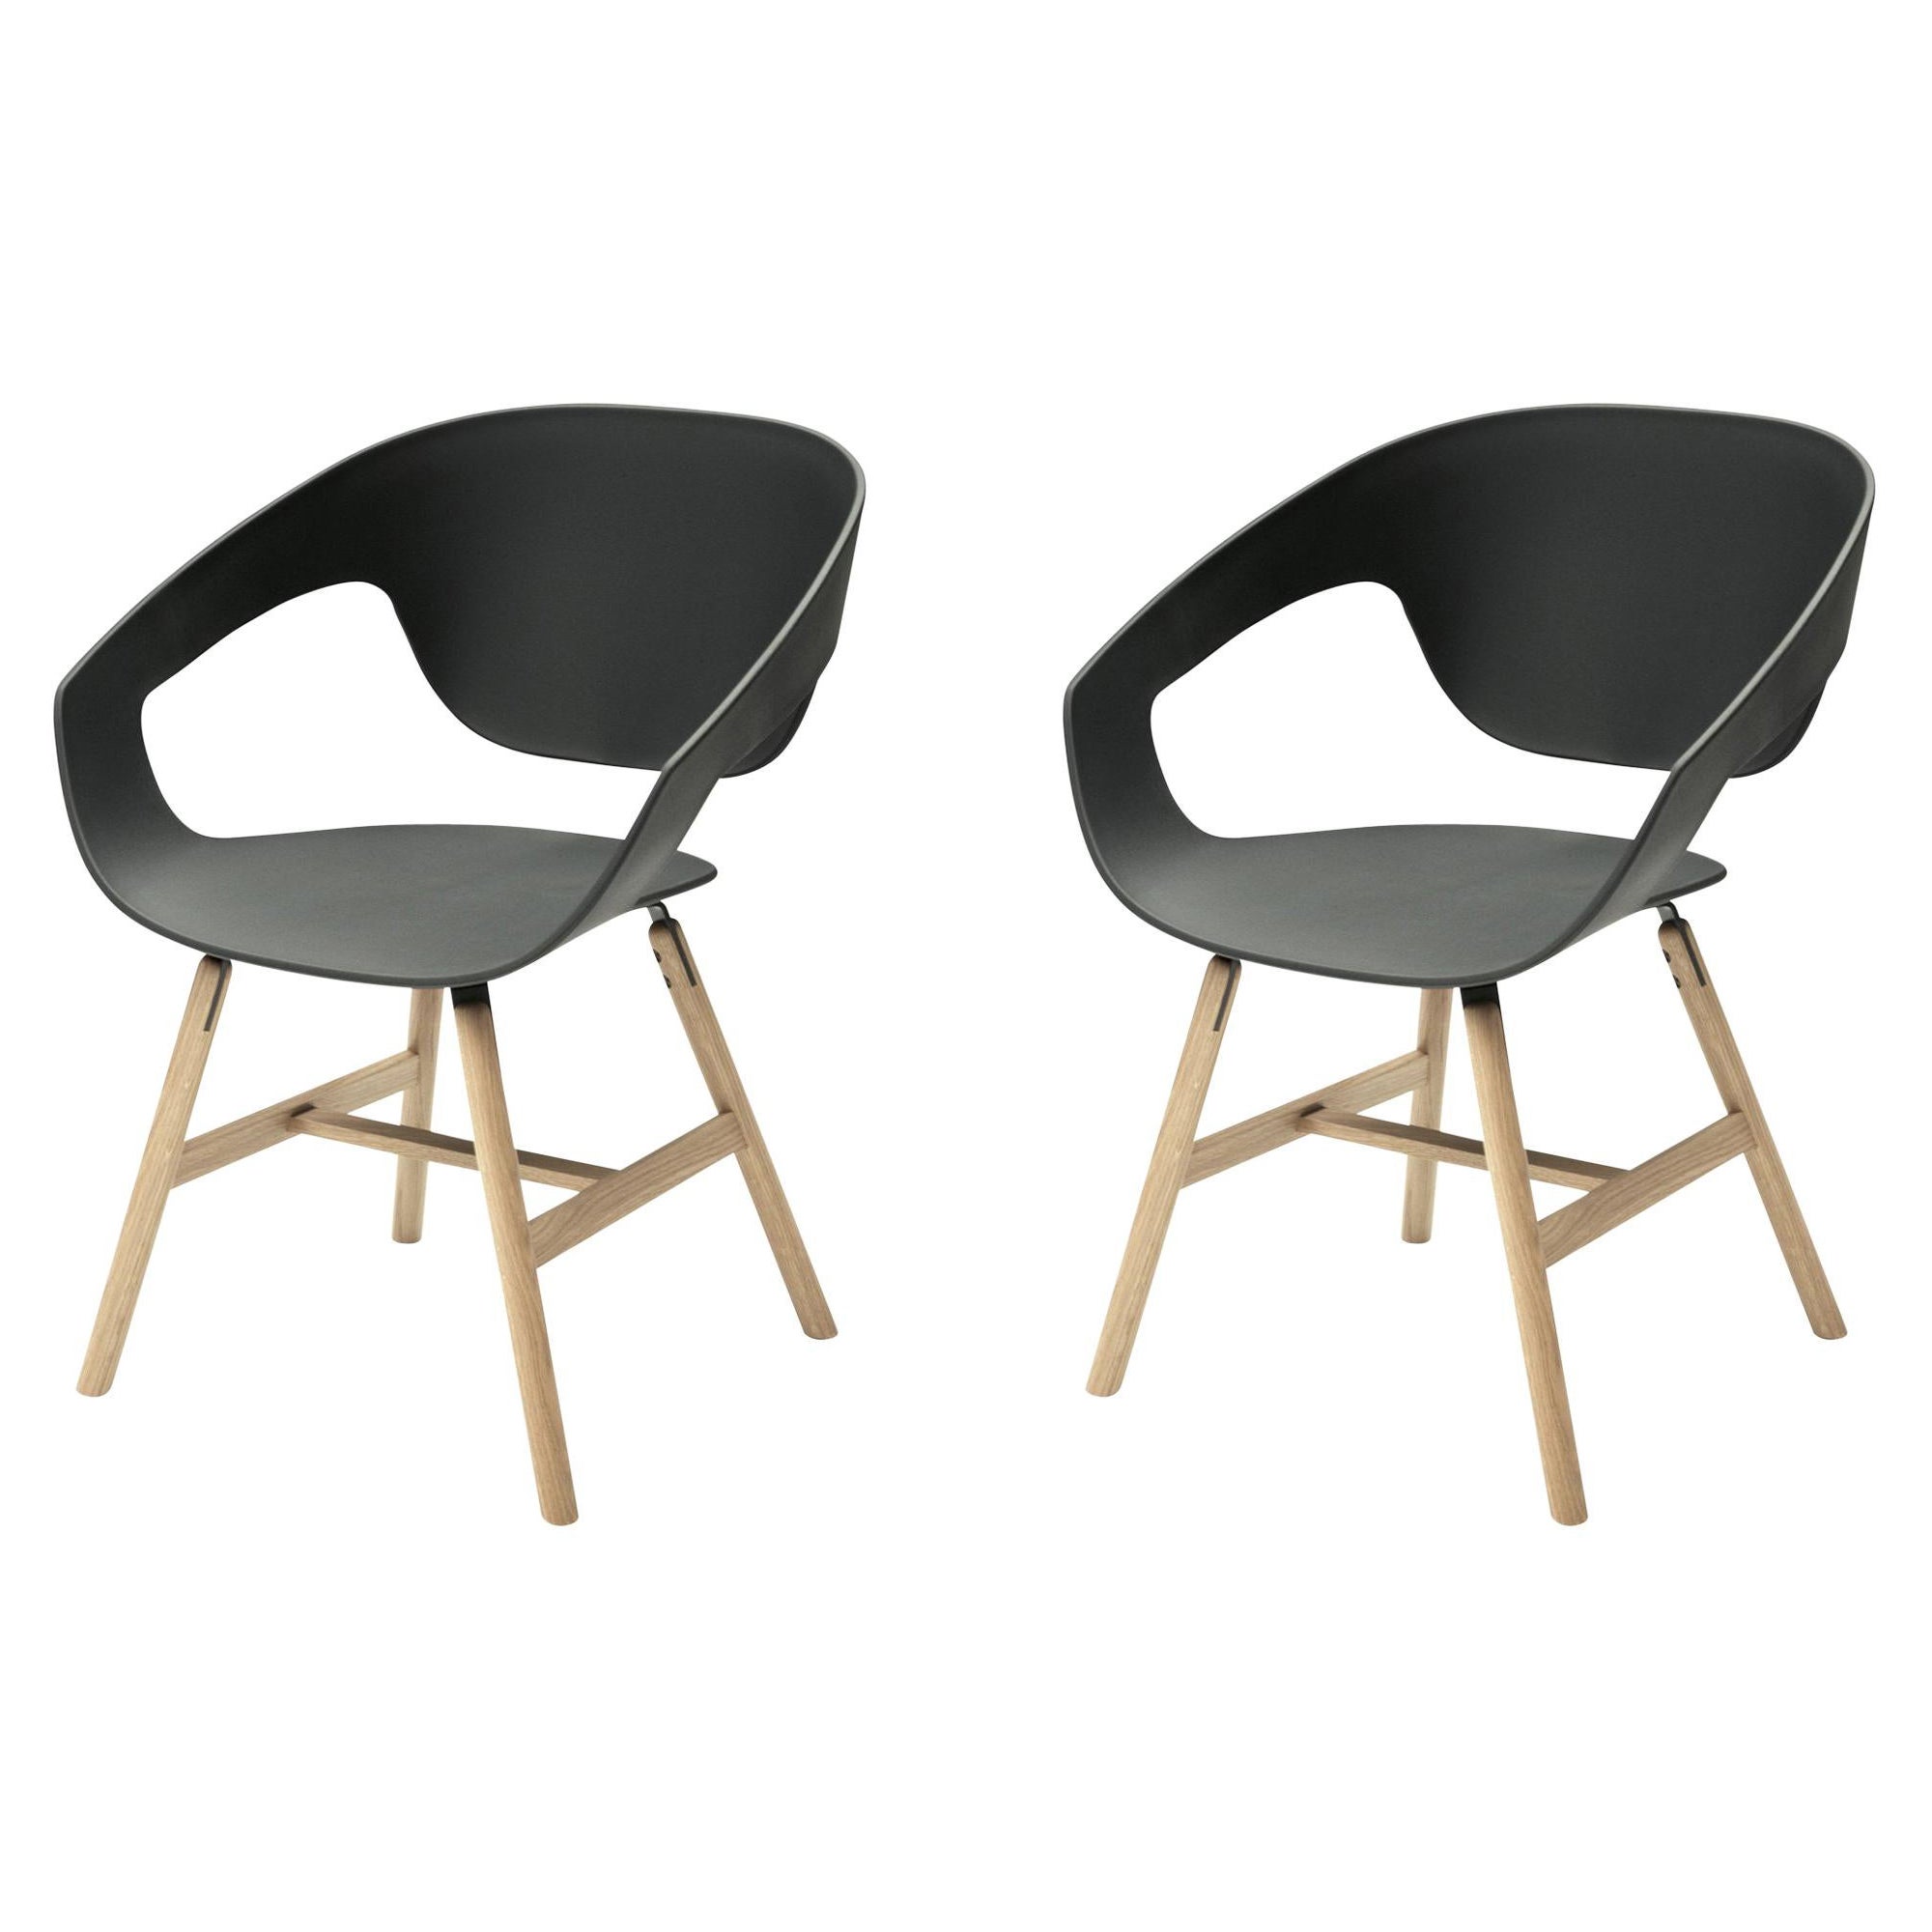 Vad Set of 2 Black Chairs by Luca Nichetto # 1